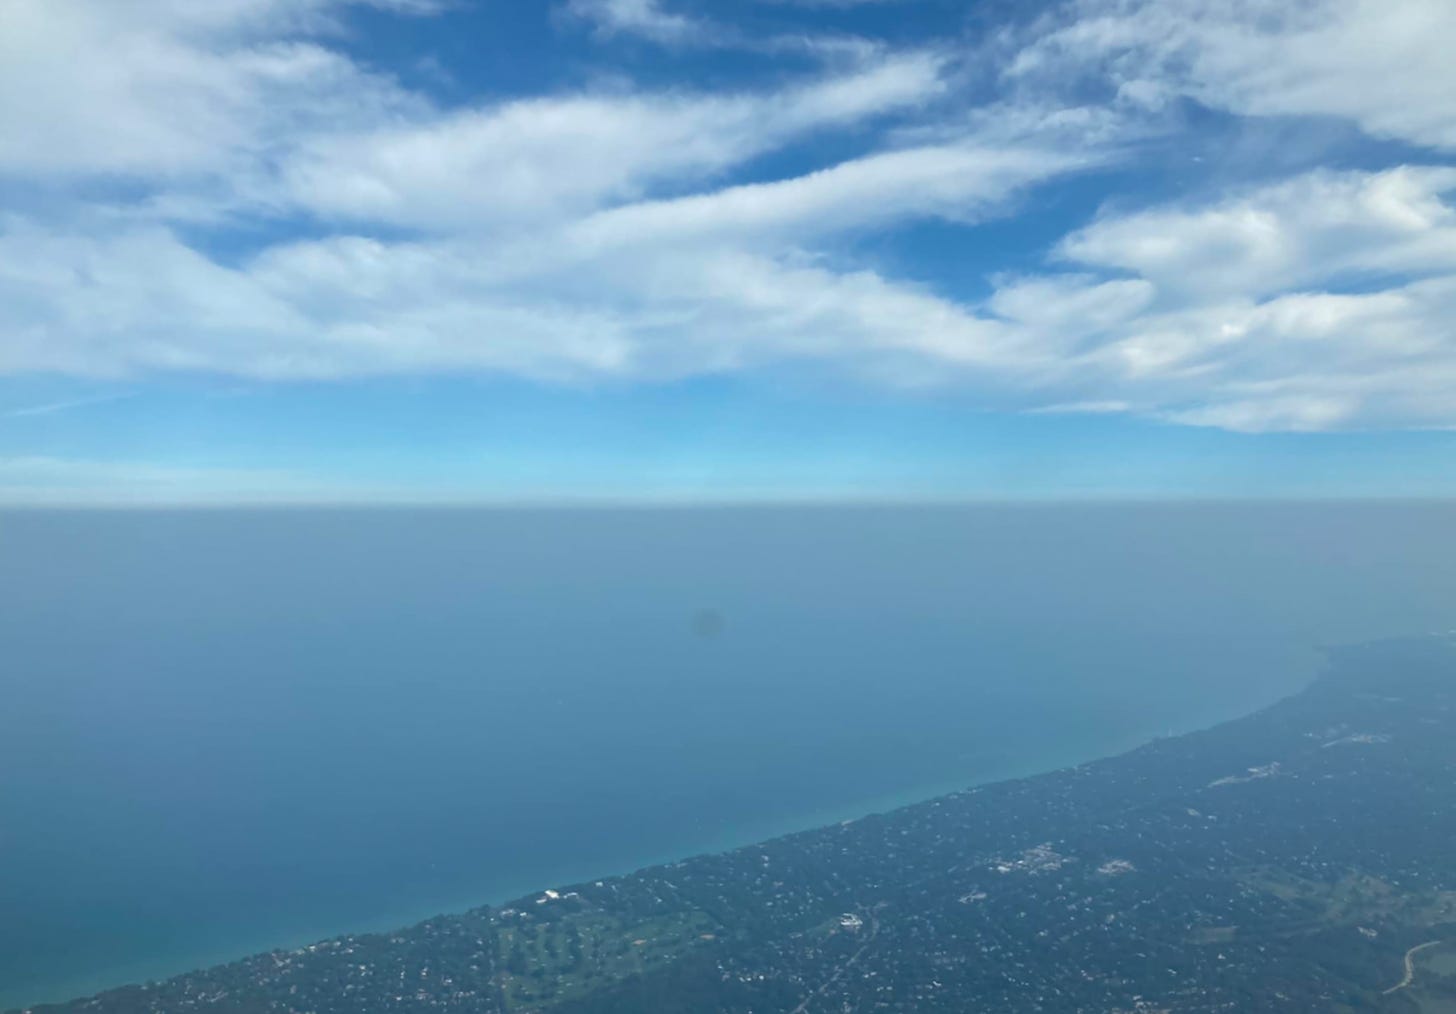 A view of Lake Michigan taken from a plane flying over.